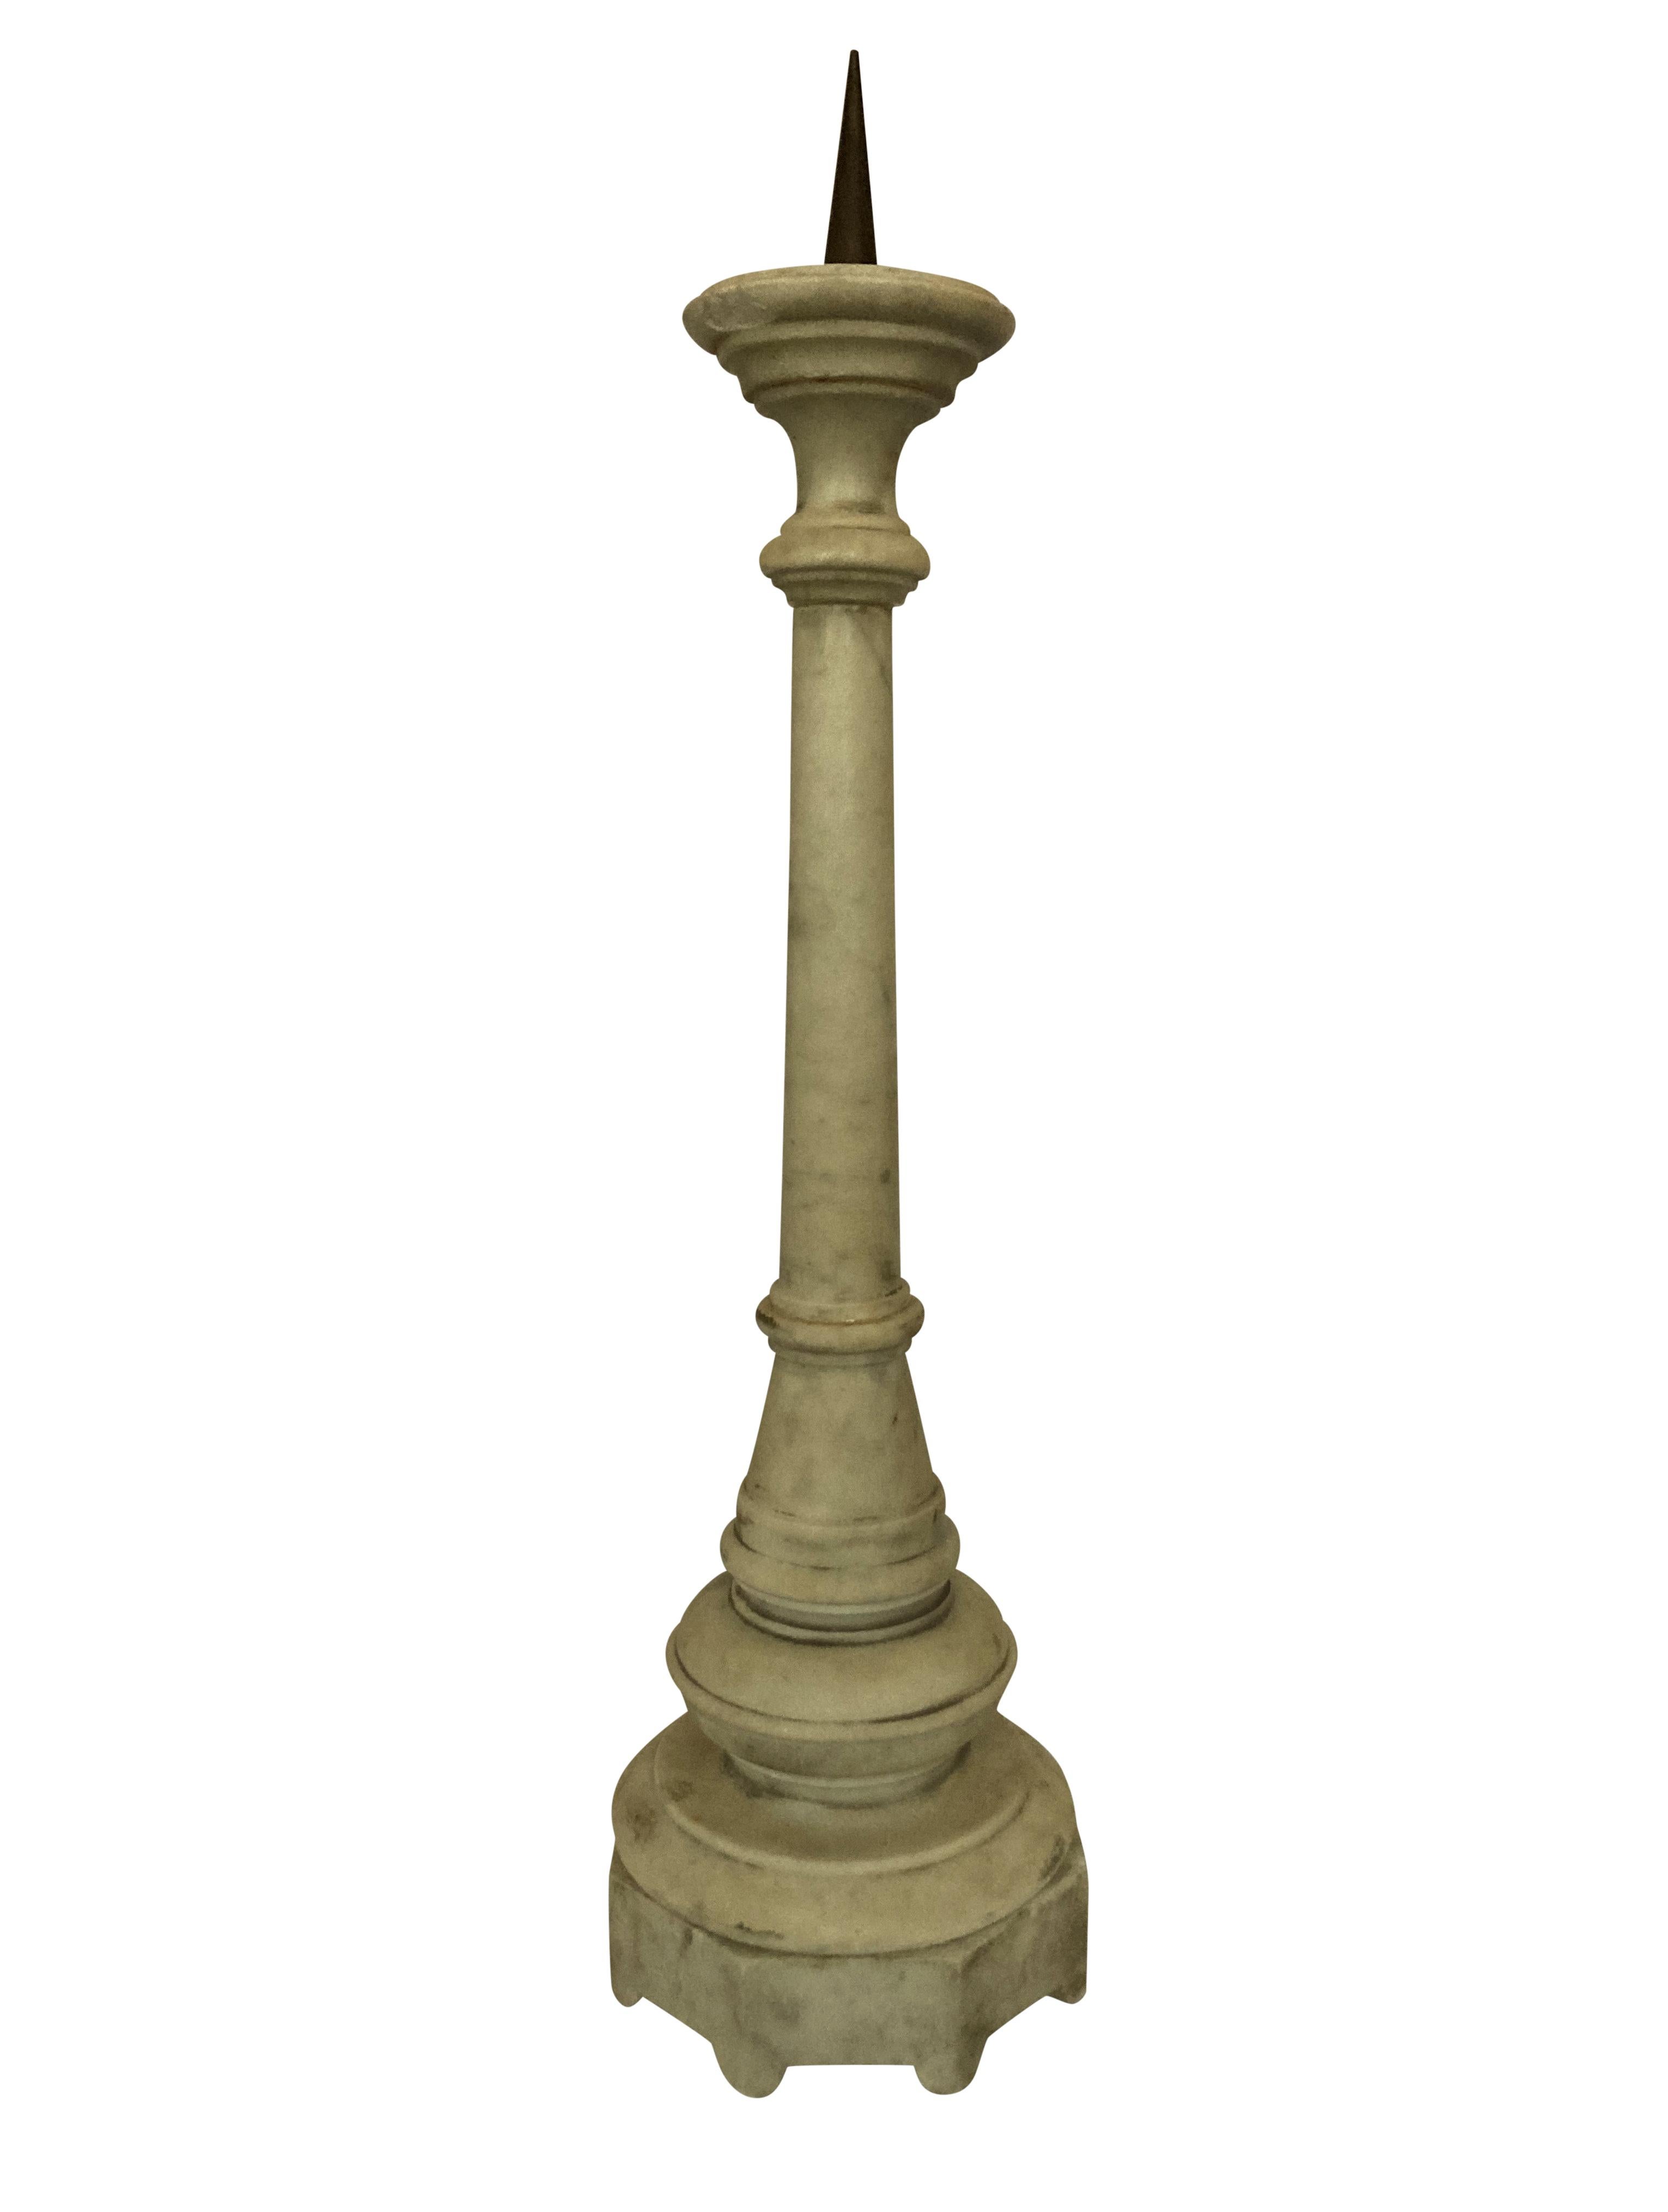 A pair of elegant Flemish pricket sticks in marble with bronze spikes.